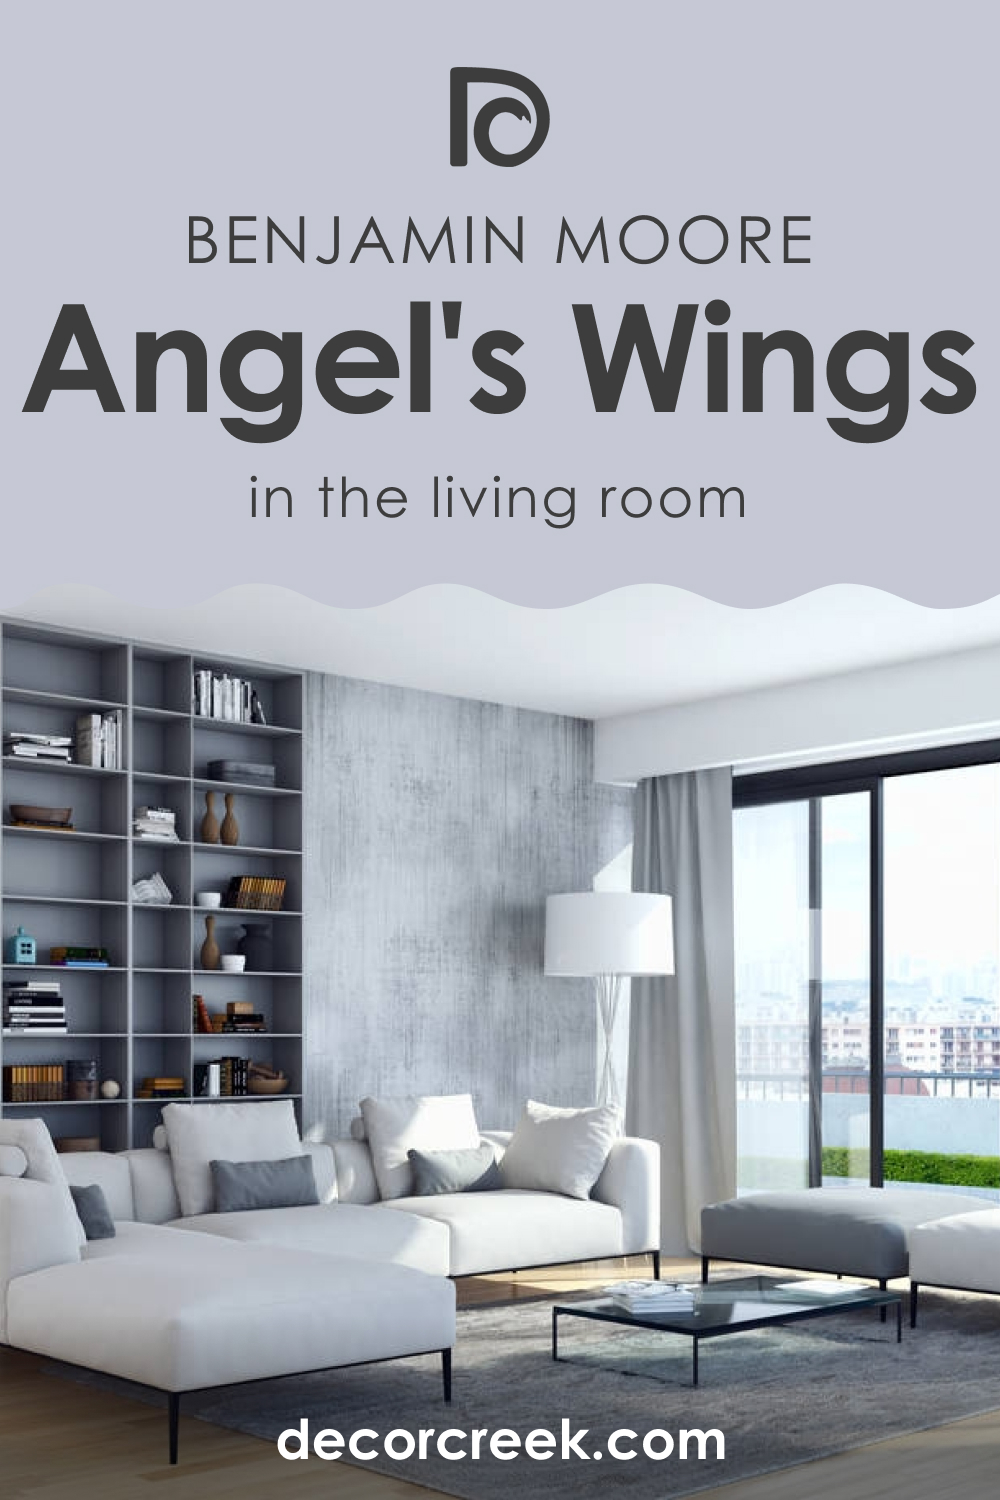 How to Use Angel's Wings 1423 in the Living Room?